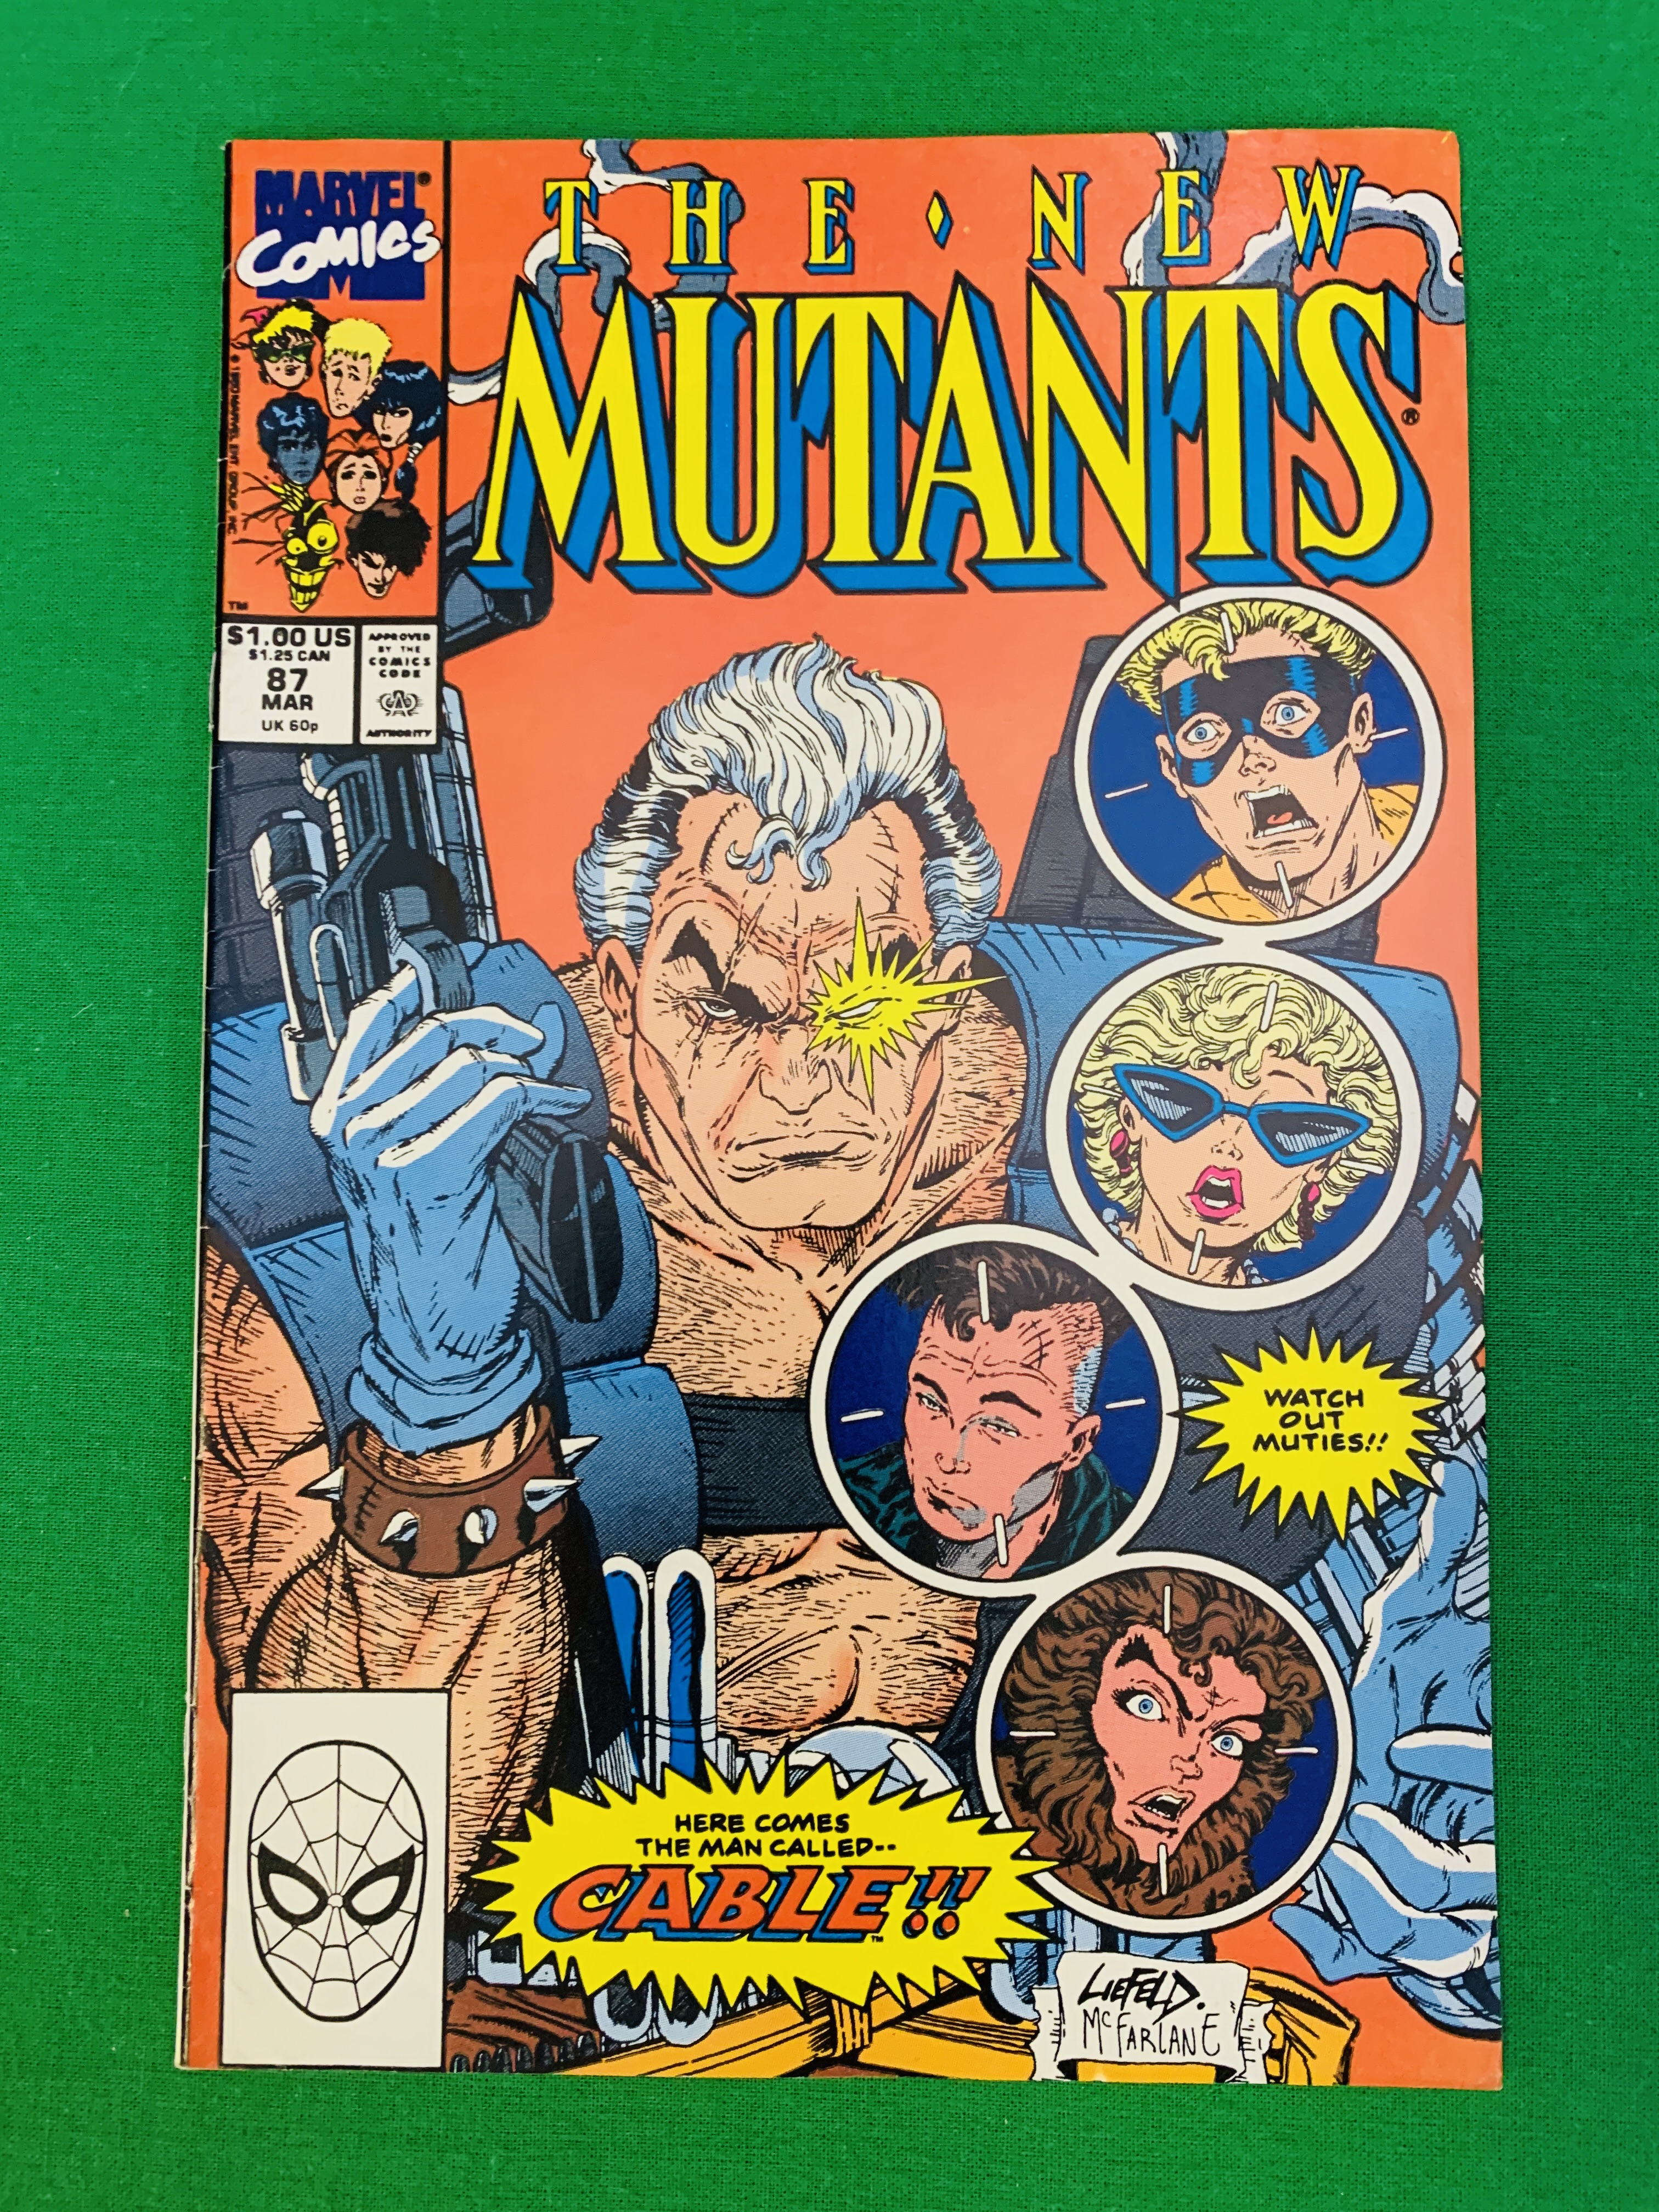 MARVEL COMICS THE NEW MUTANTS NO. 87 FROM 1990, FIRST APPEARANCE OF CABLE.